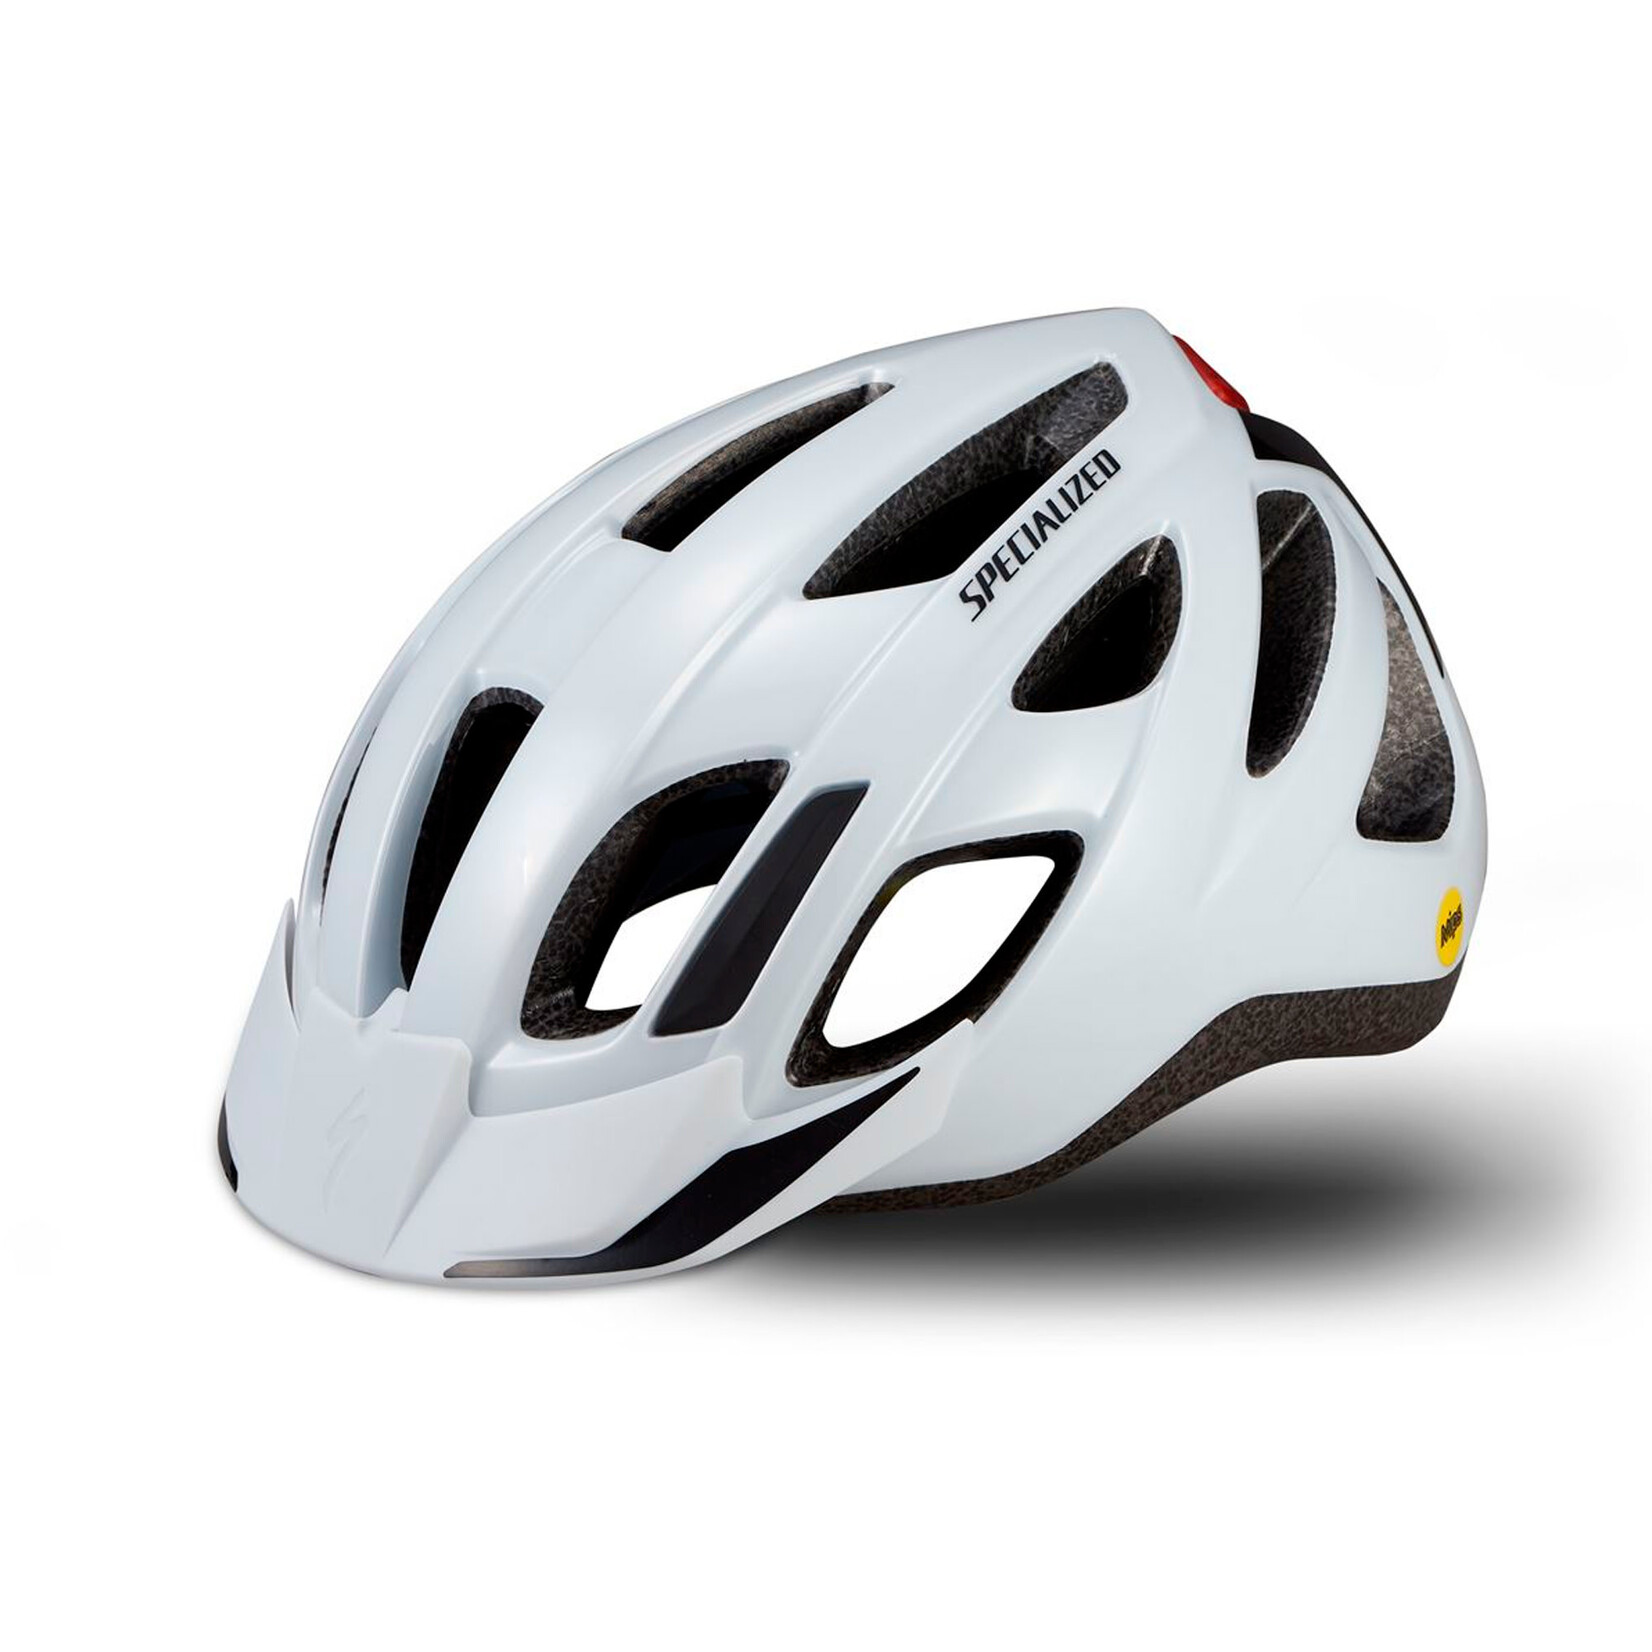 Specialized Casco Specialized Centro Led Mips